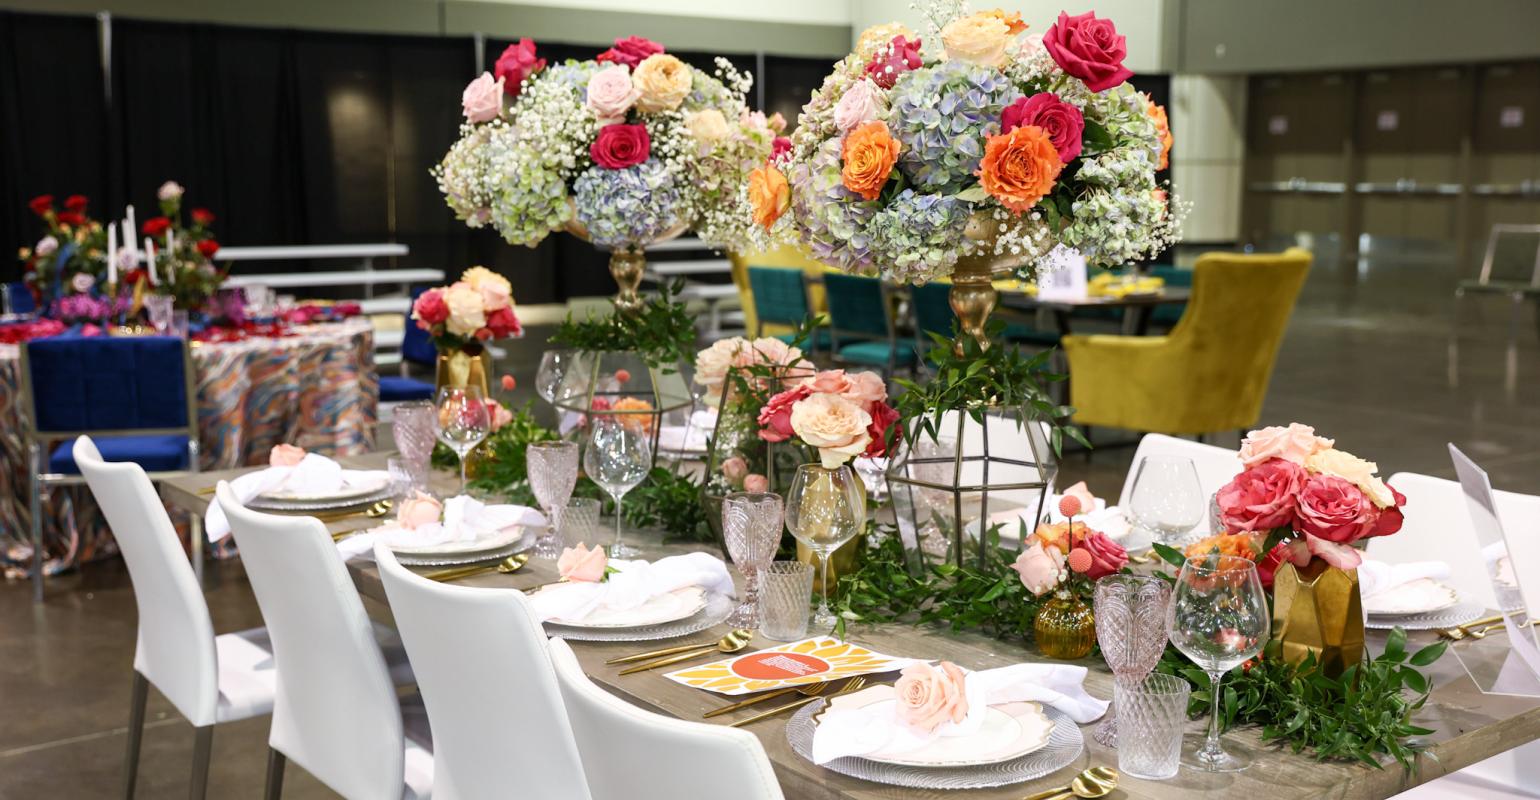 Florals Come to Life at Catersource + The Special Event Special Events